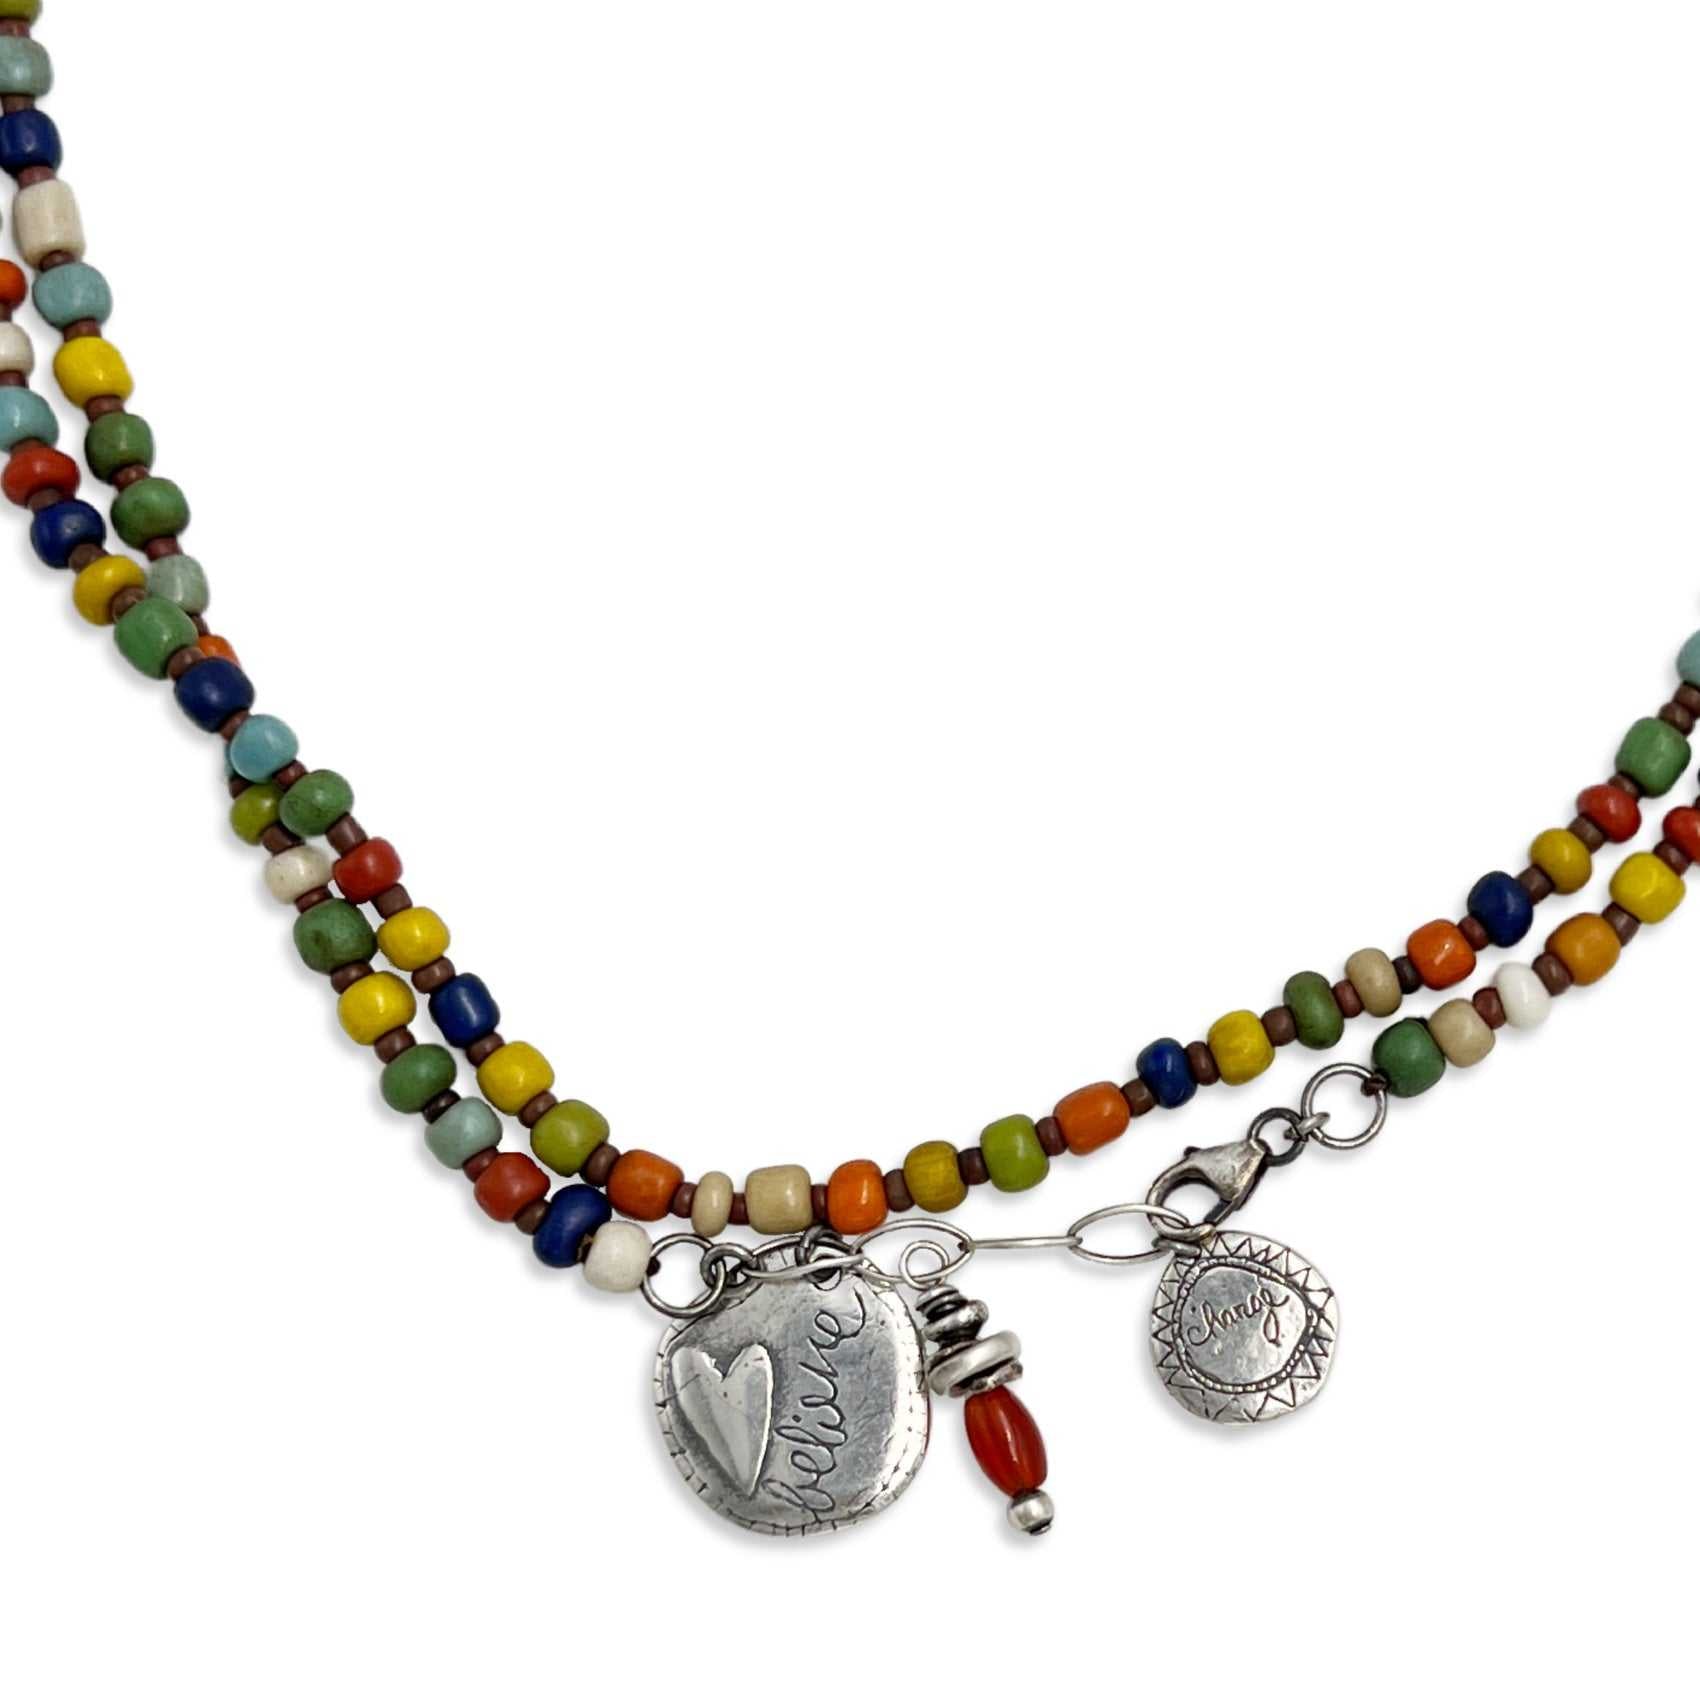 Antique African Bead Necklace – Jane Diaz NY